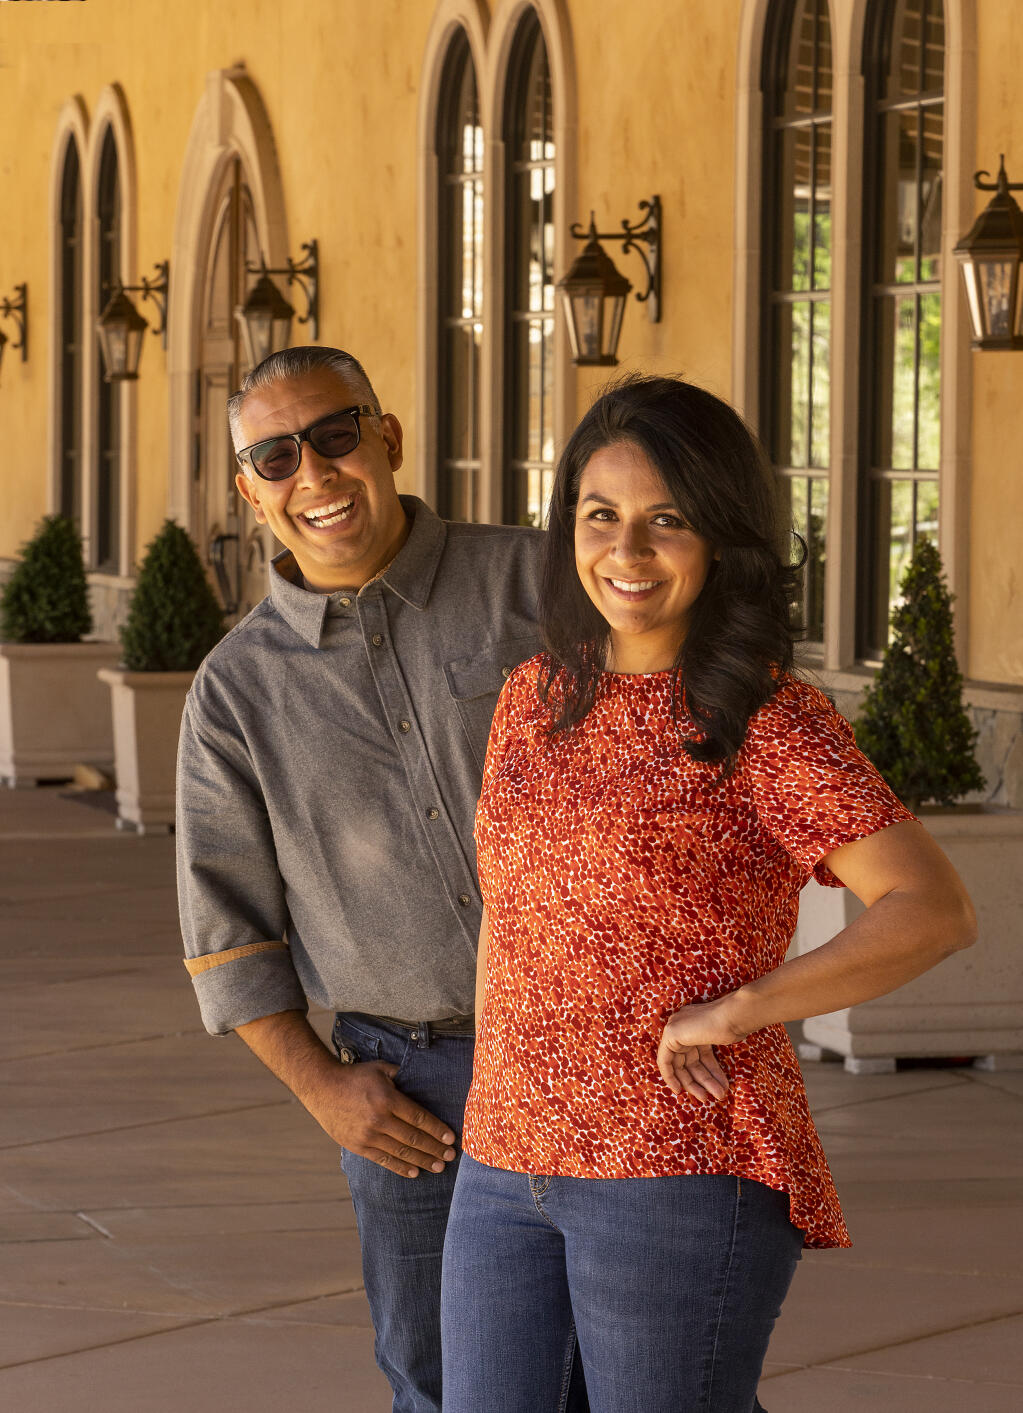 Aldina Vineyards winemaker Monica Lopez and her brother Francisco created Bacchus Landing in Healdsburg, a wine hospitality center with tasting rooms, event space, rooftop terrace and an outdoor piazza scheduled to open in spring 2021.  (John Burgess / The Press Democrat)